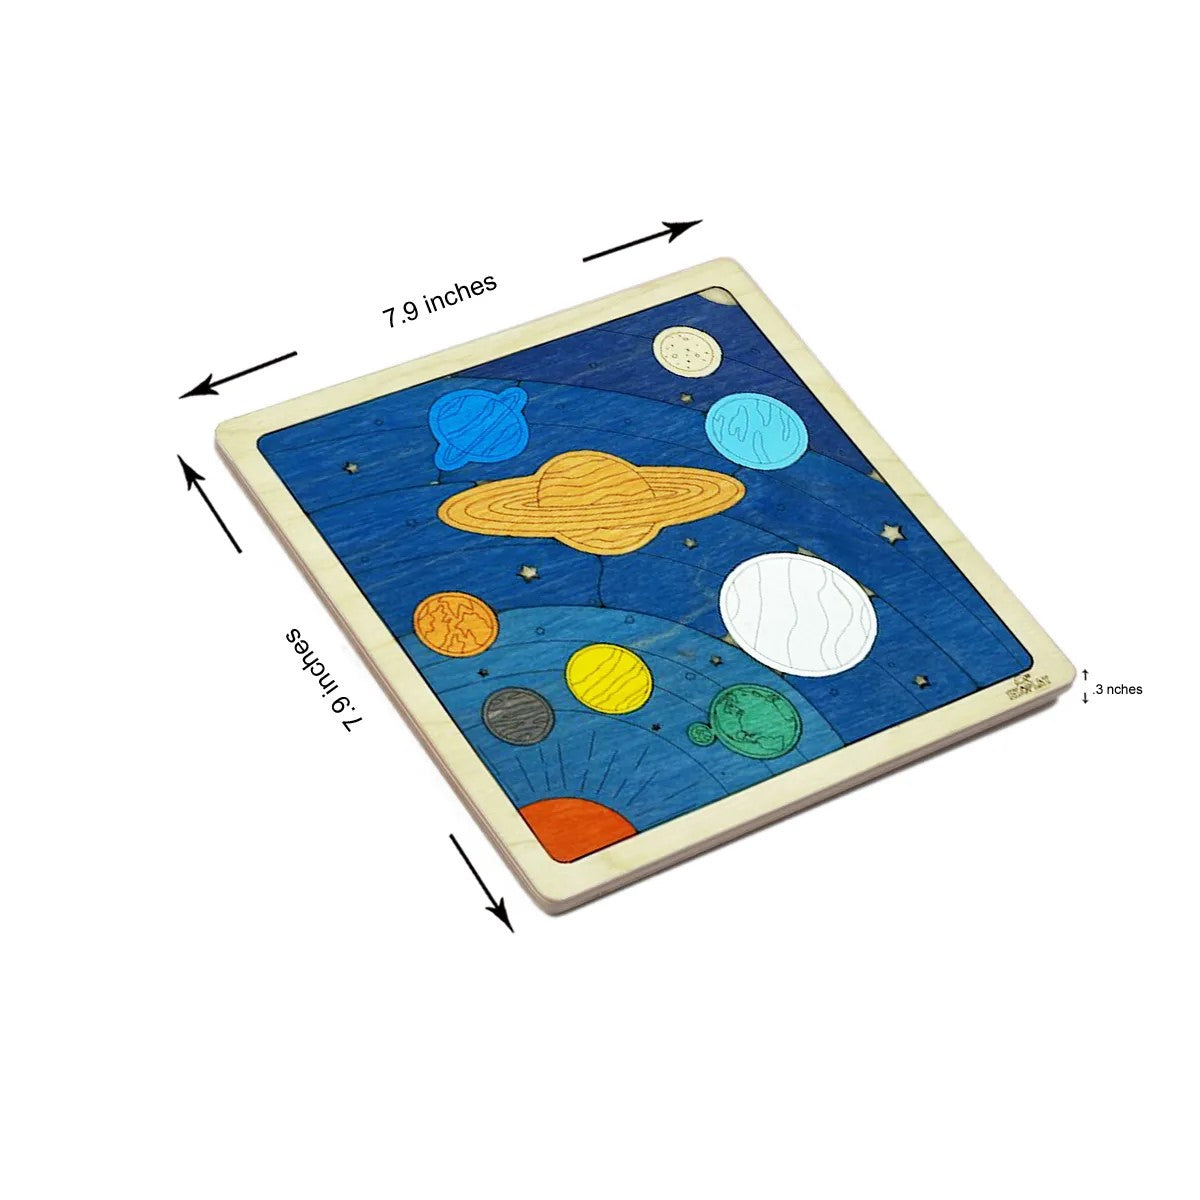 Wooden Planet Puzzle by Ekoplay